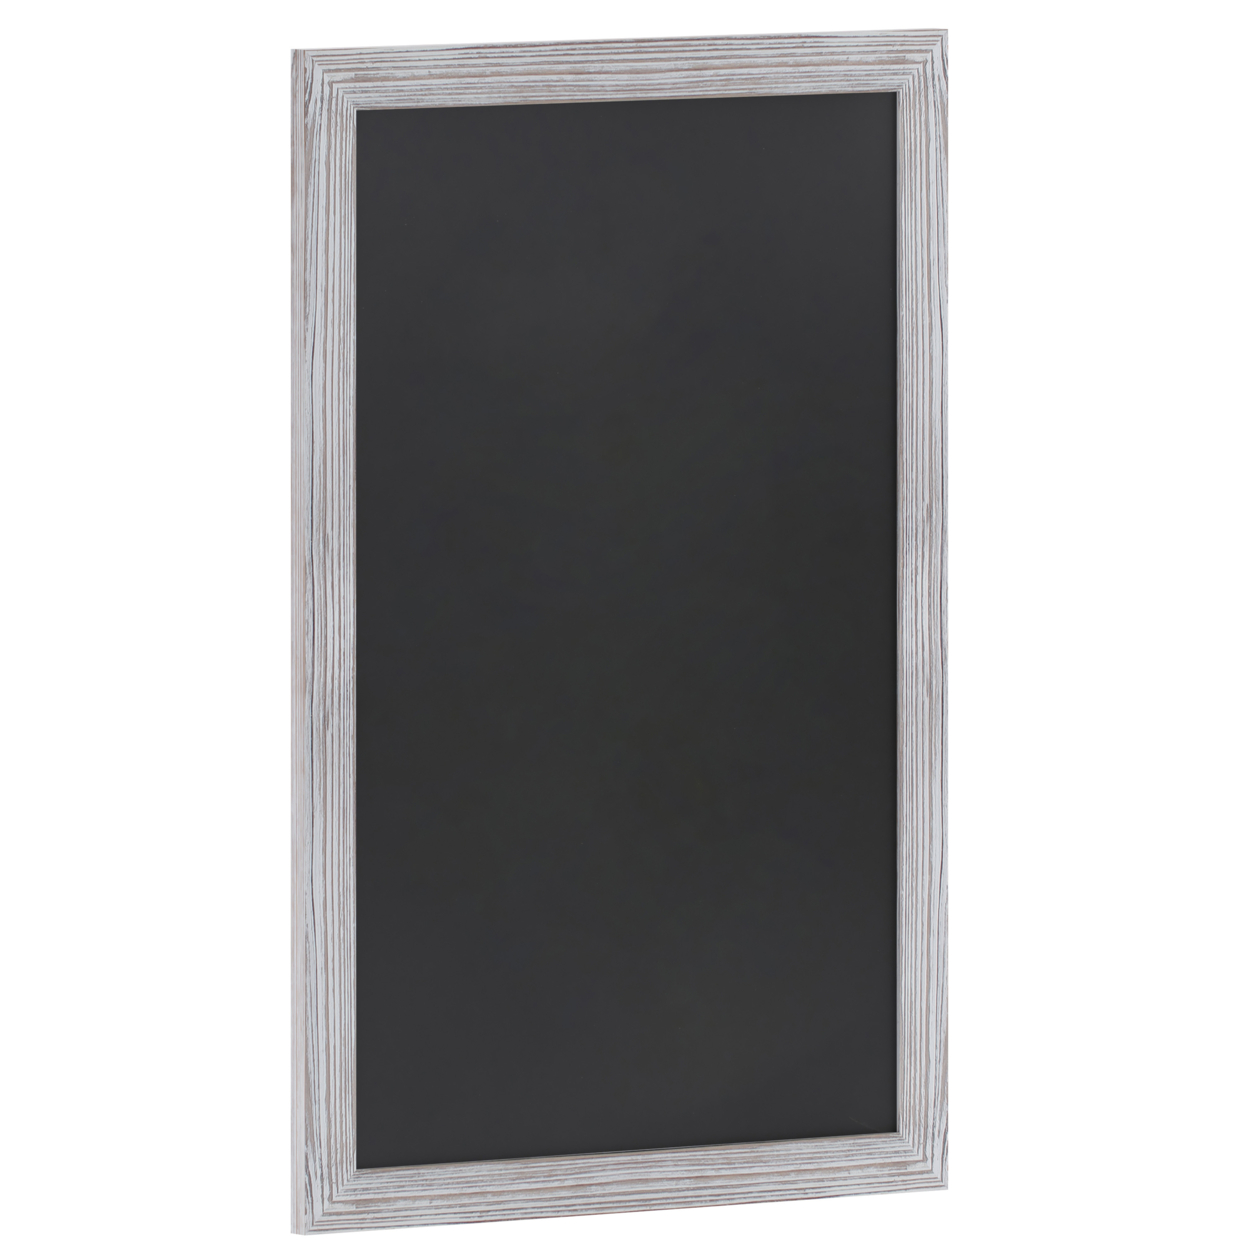 Wall Hanging Chalkboard, Washed White Wood Frame, Rough Hewn Texture